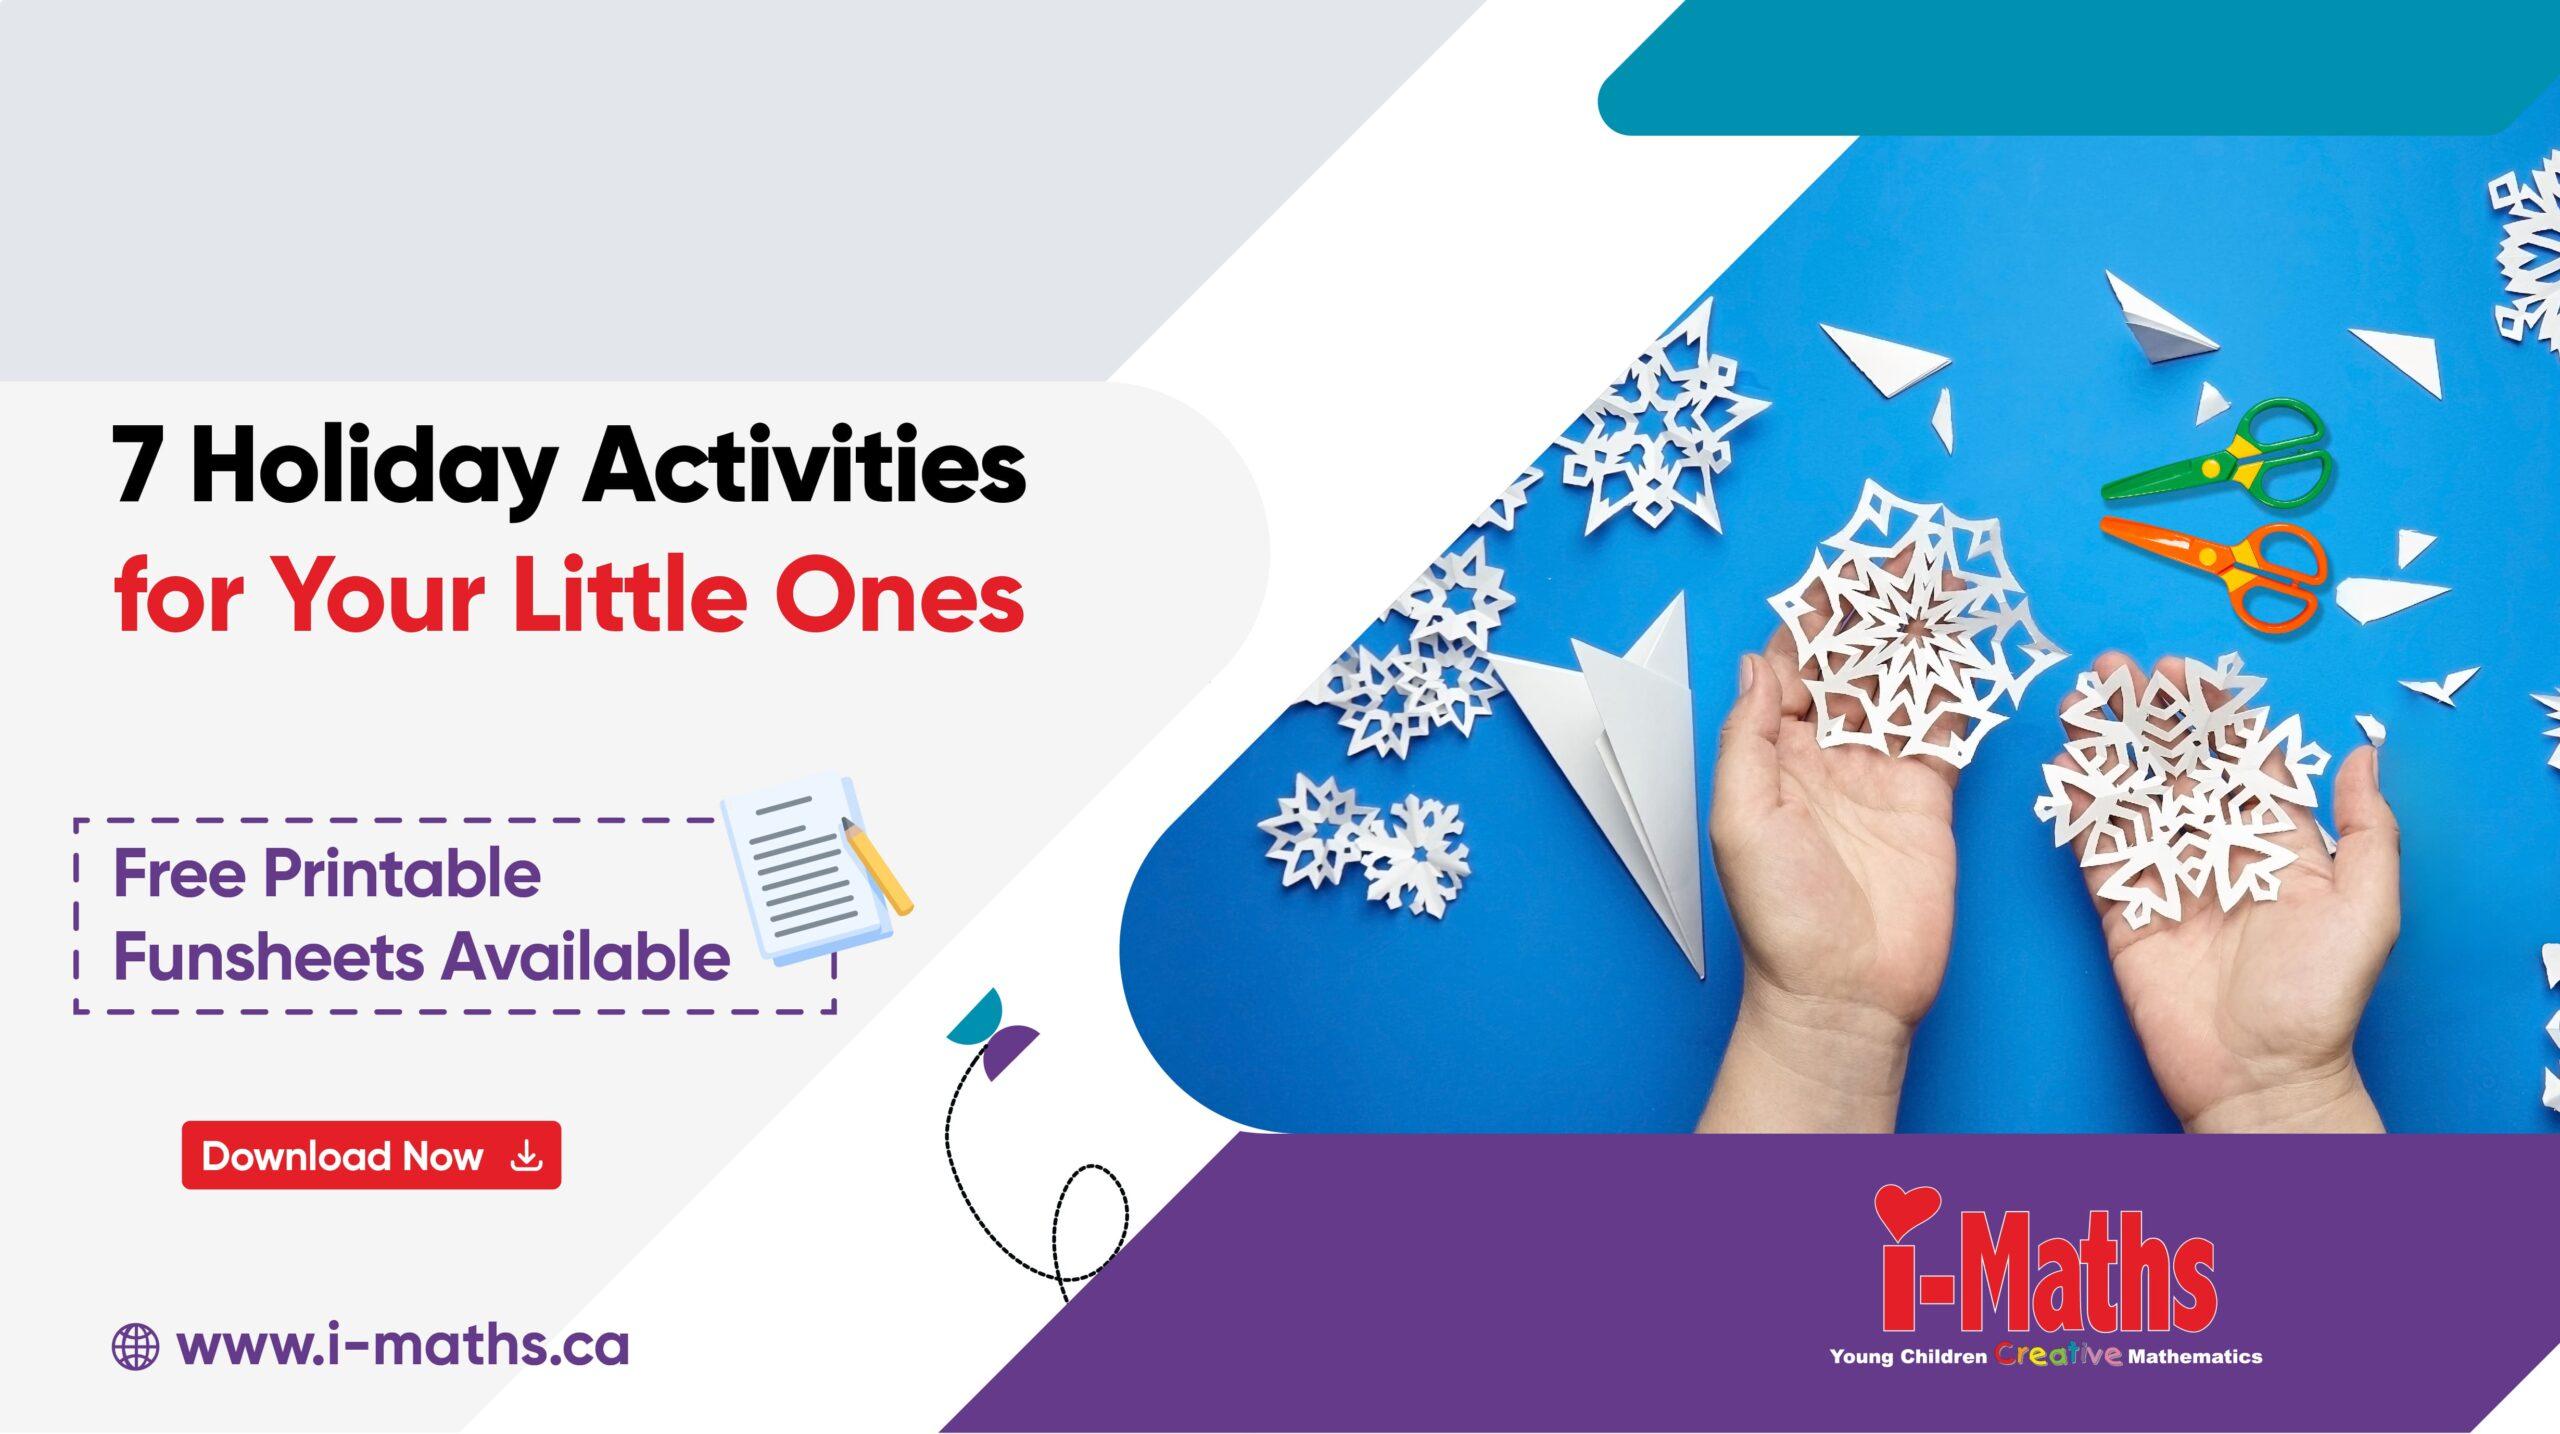 7 Holiday Activities for Your Little Ones!